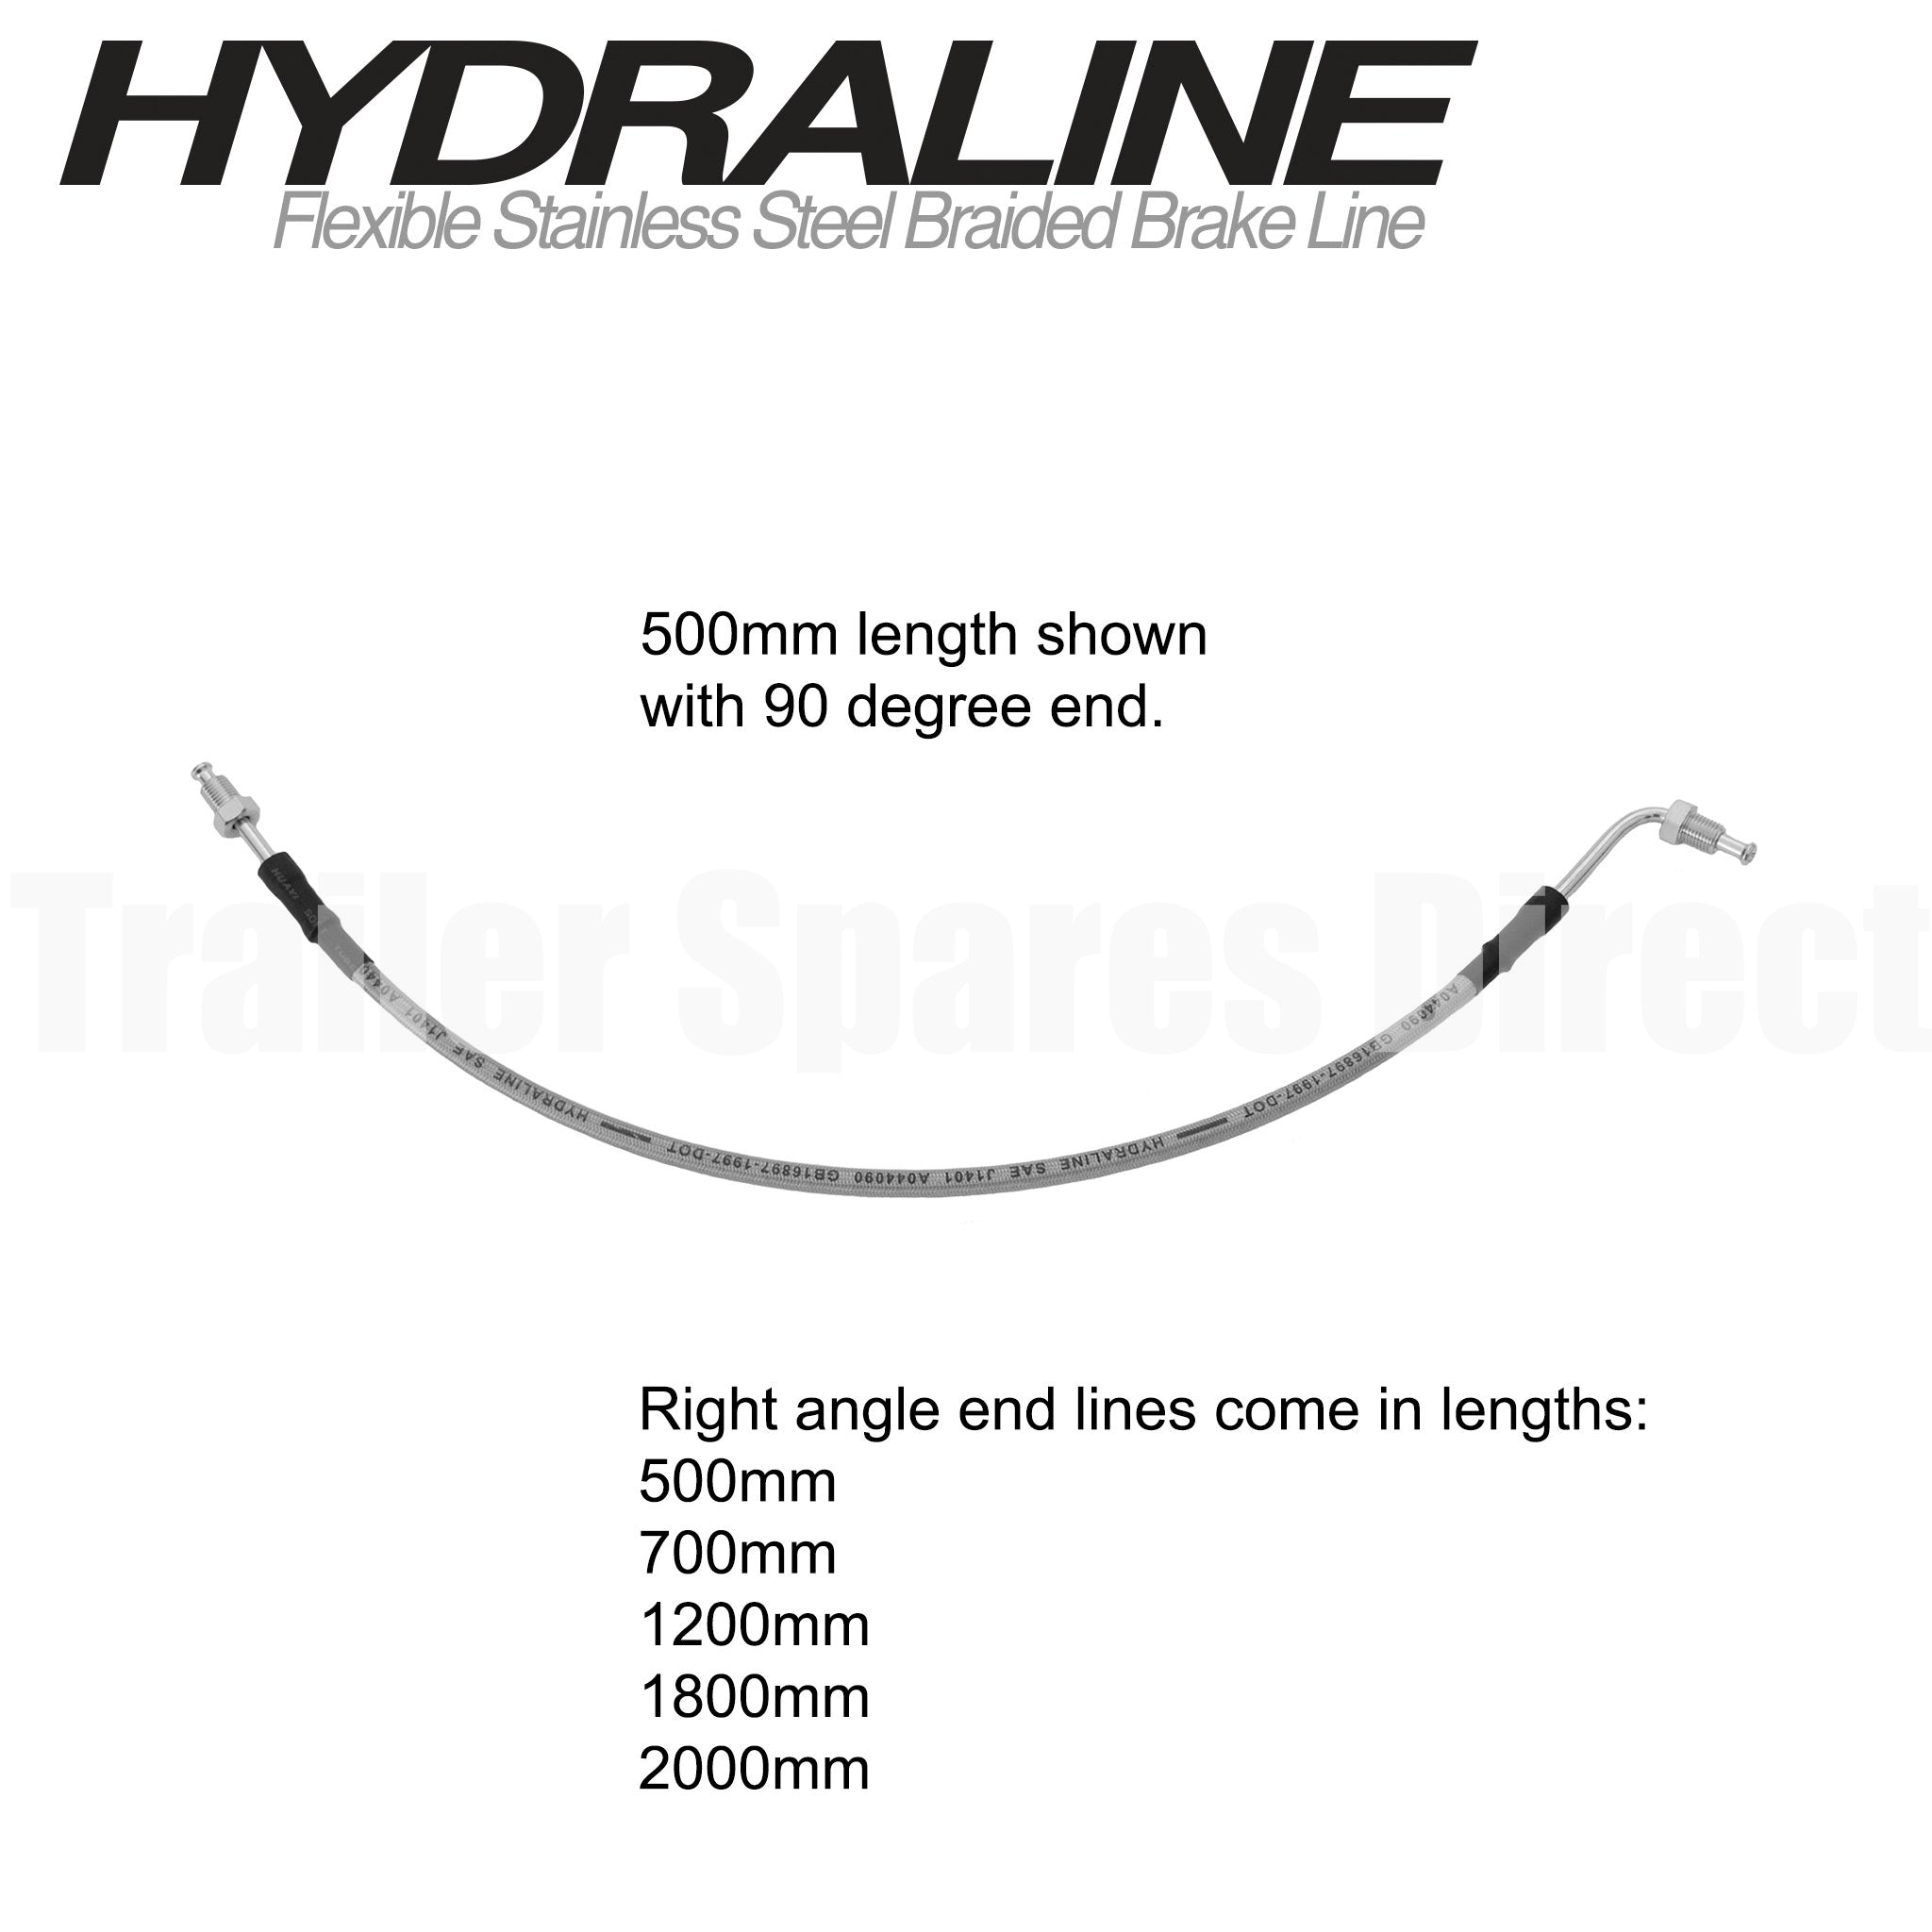 700mm HydraLine brake hose with 90 degree bend